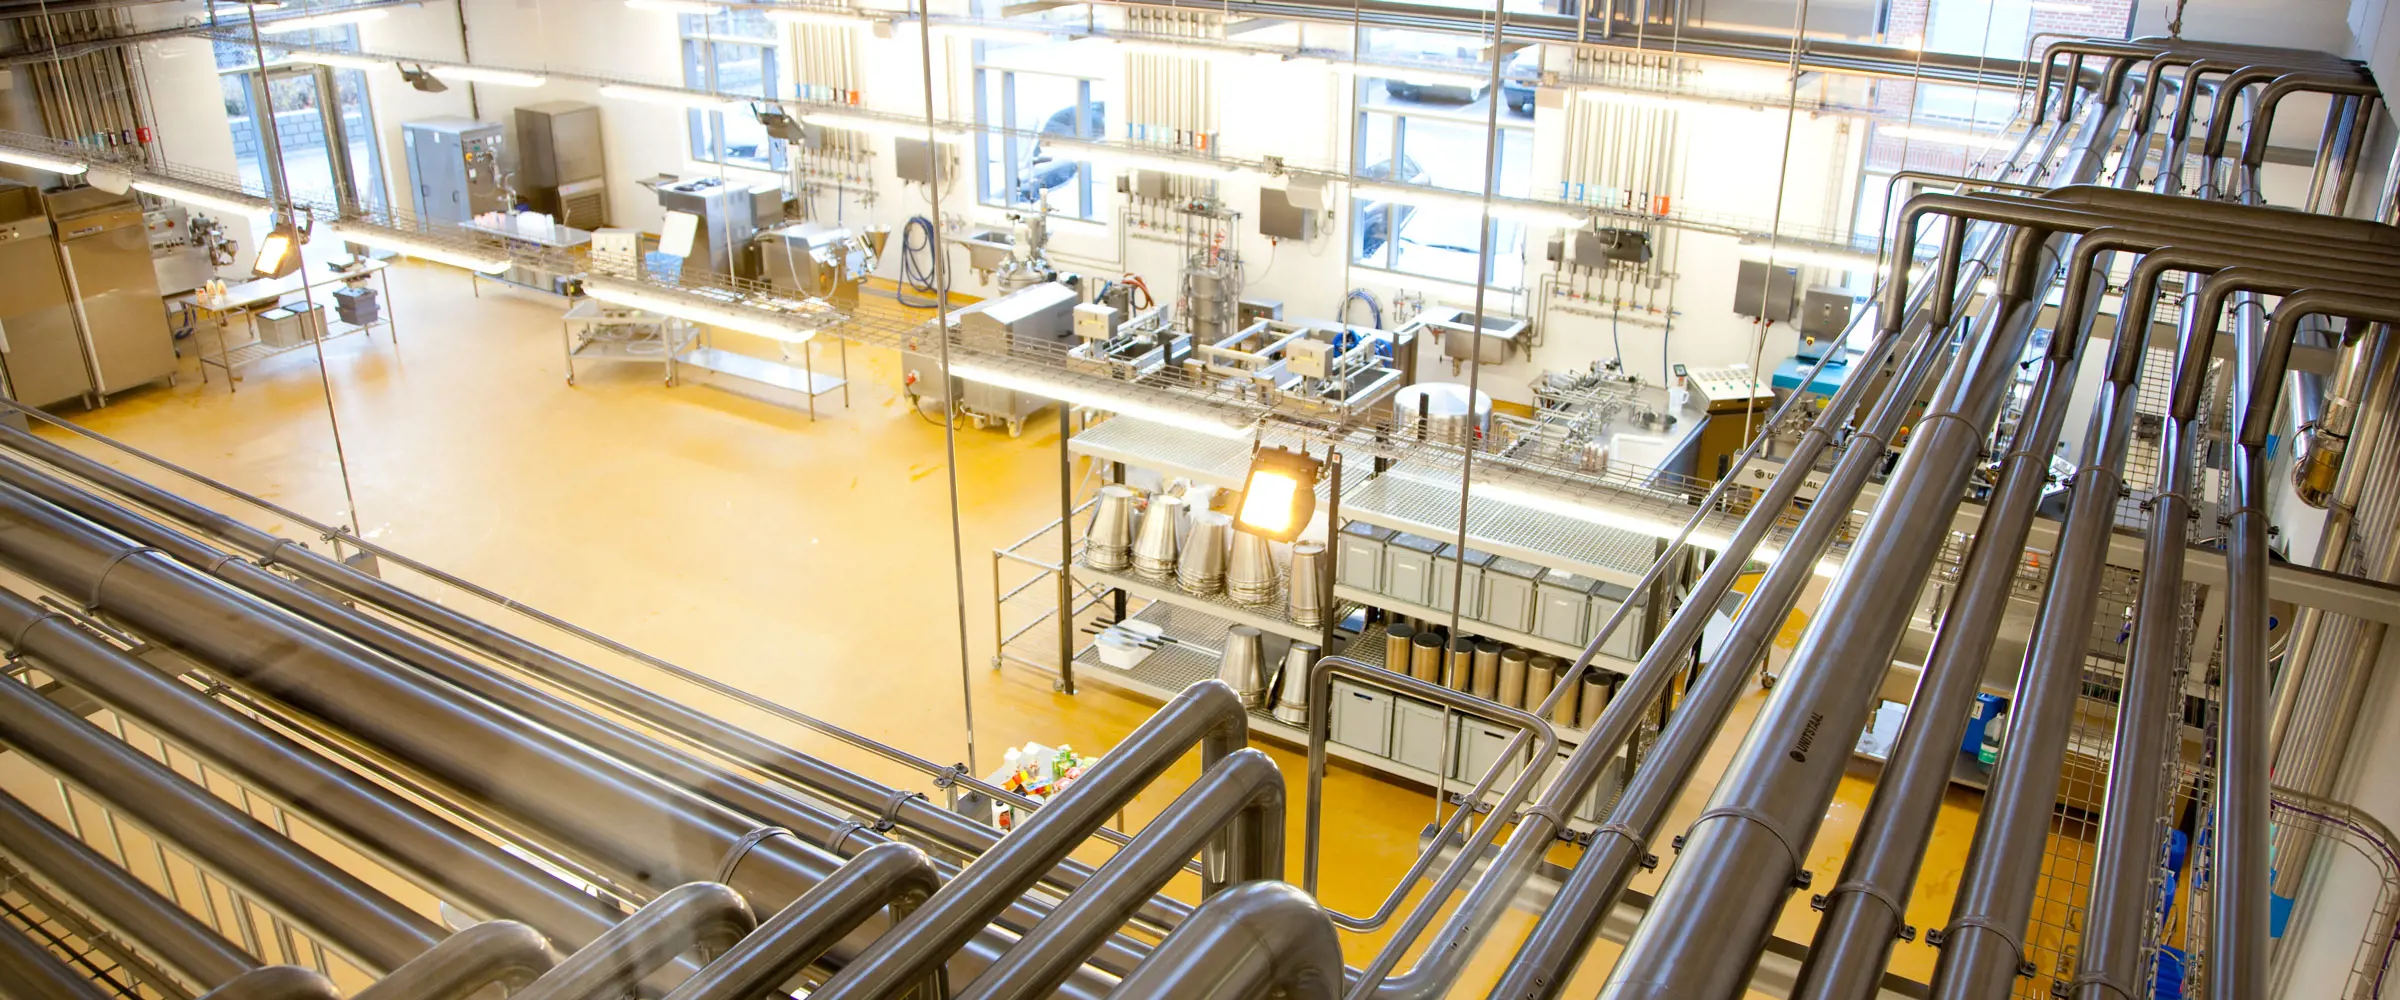 Arla Foods Ingredients runs high-tech application centres in Argentina and Denmark